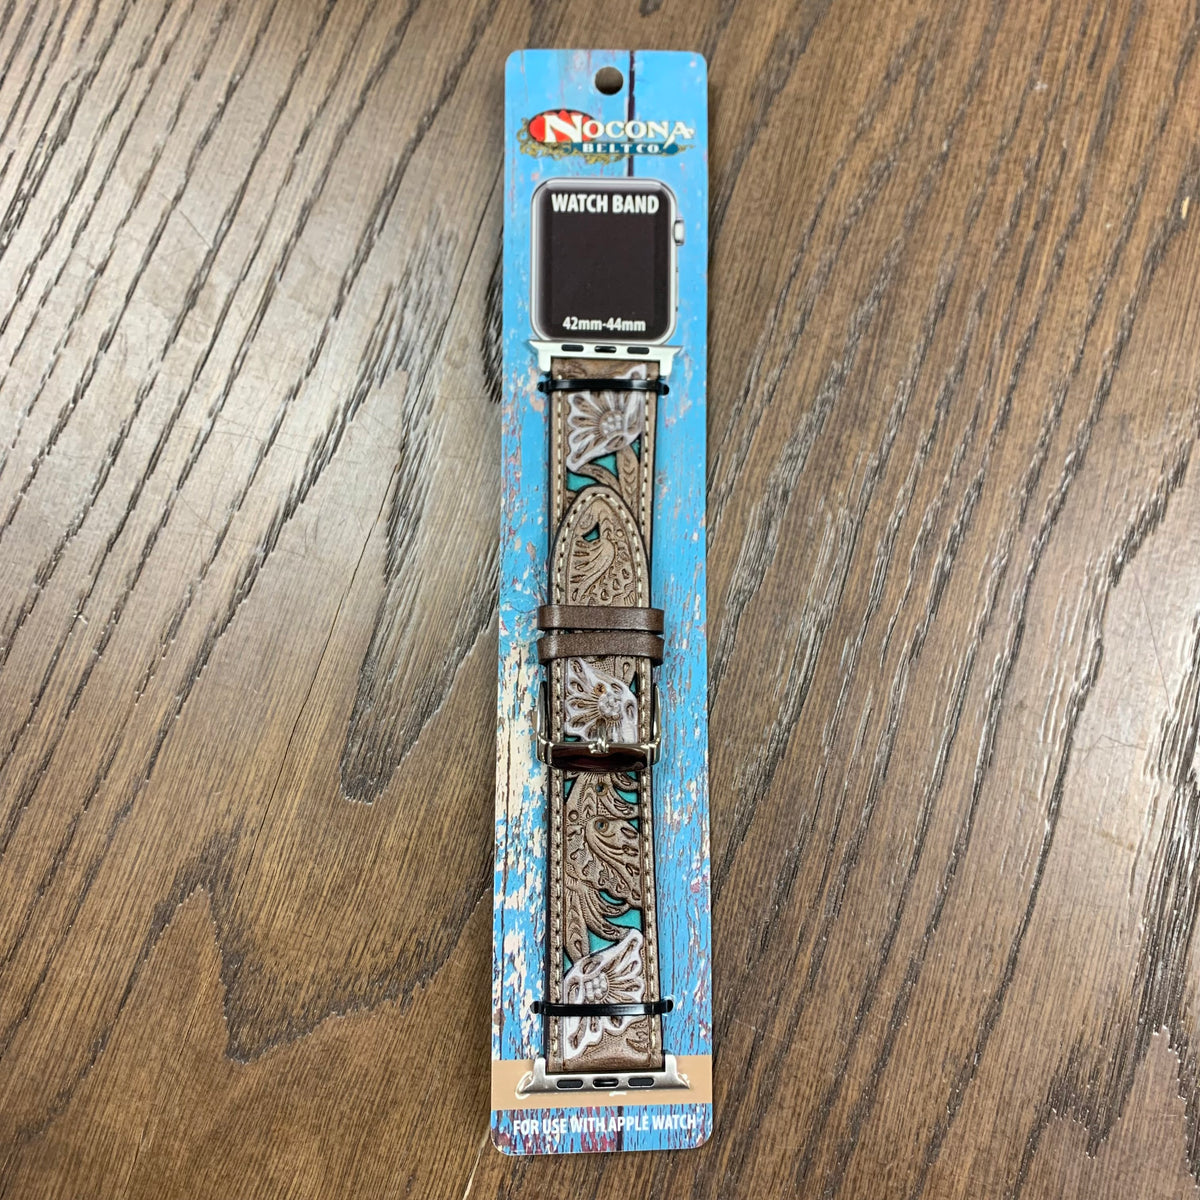 Nocona Brown and White Detailed Tooled Watch Band